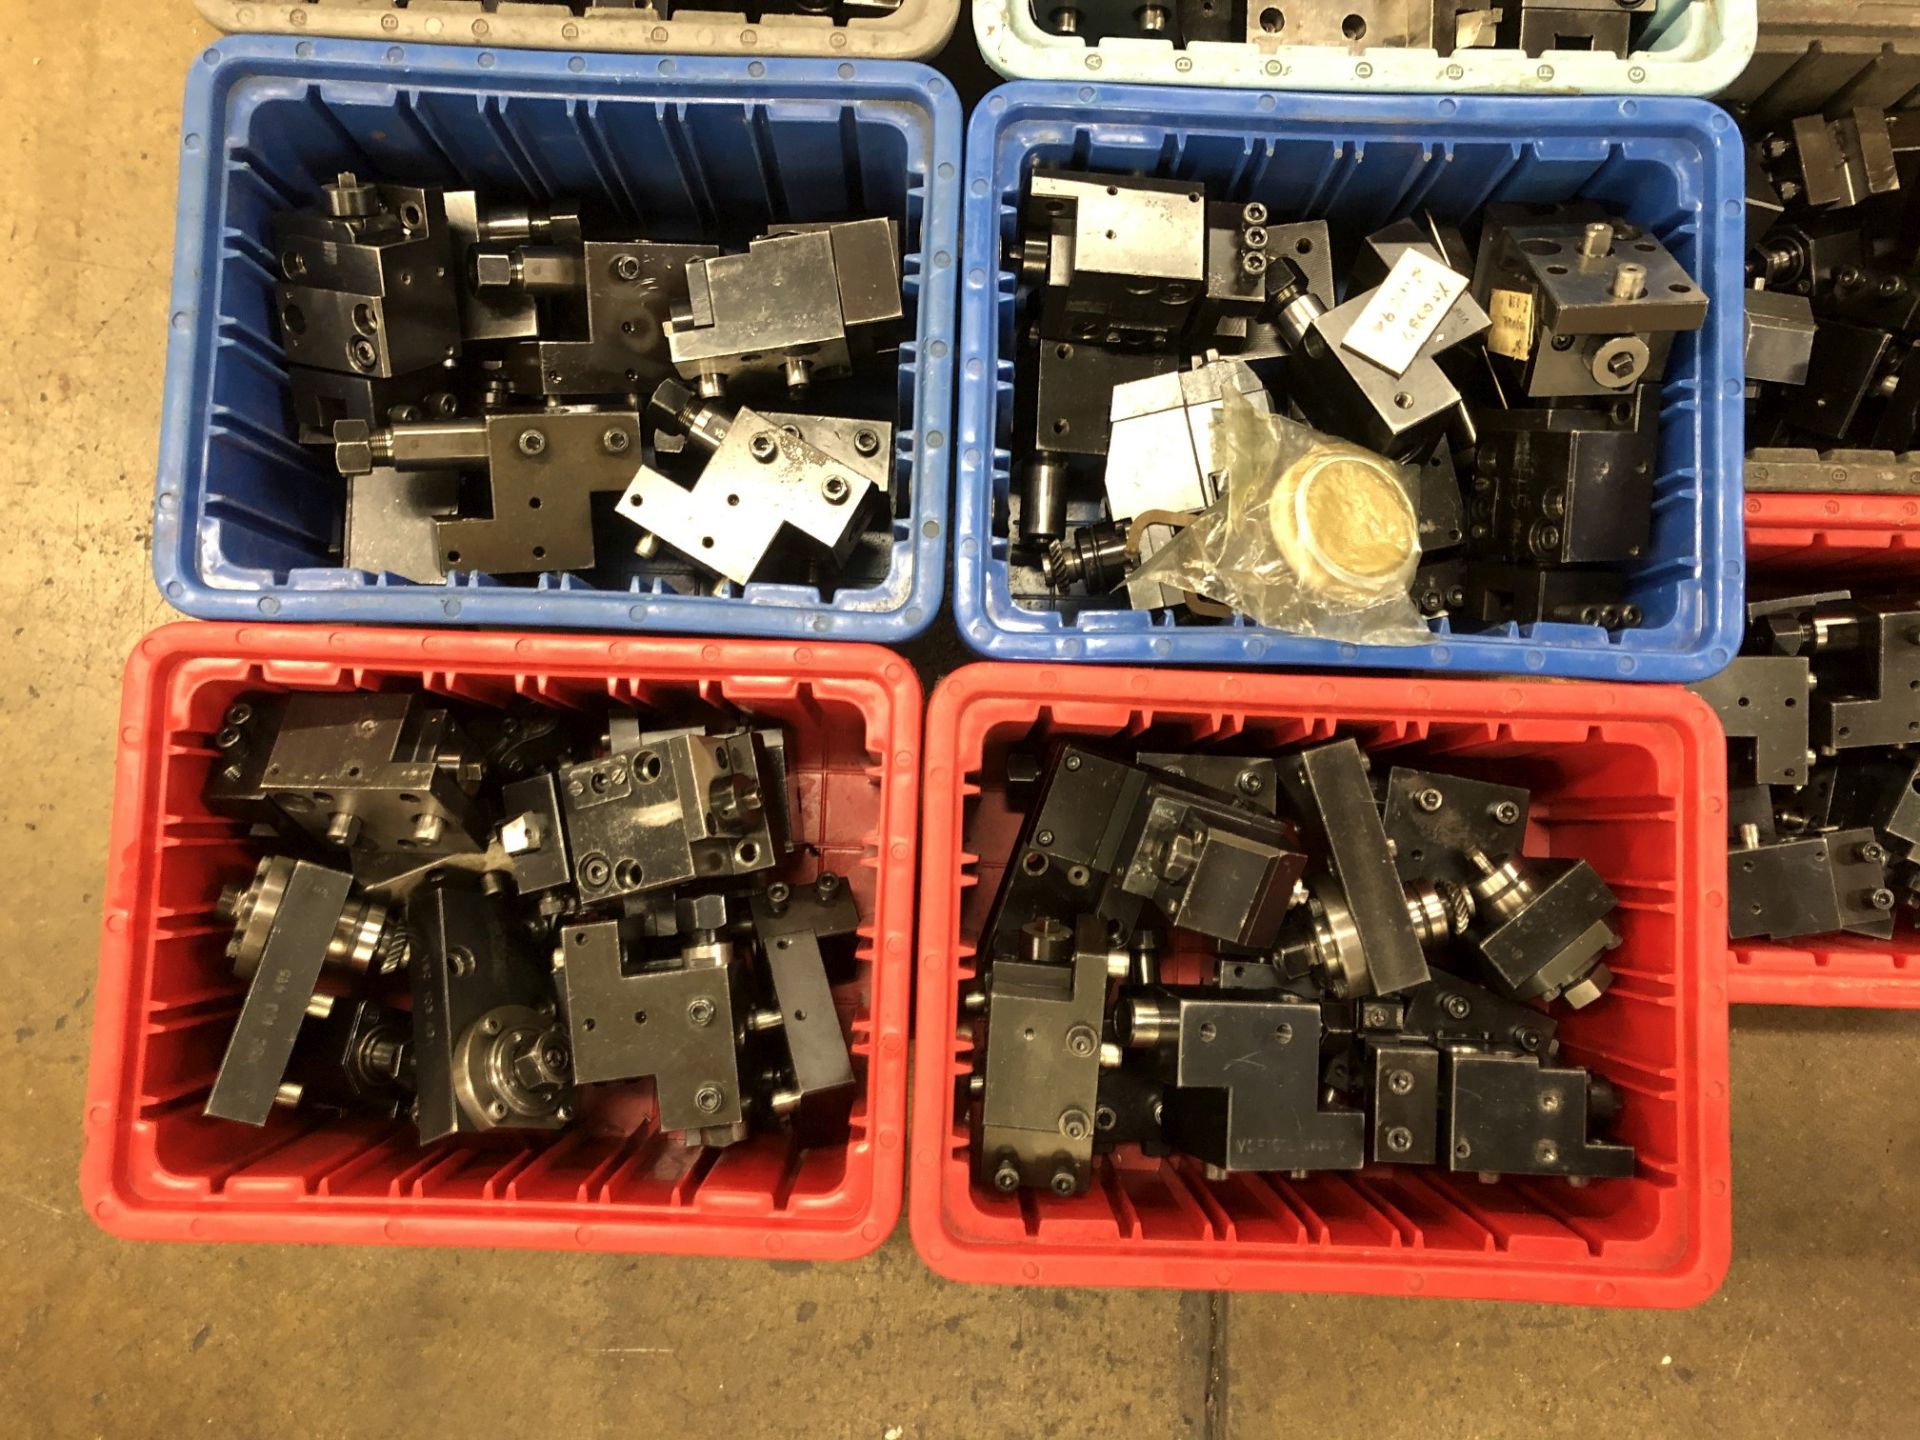 Large Quantity of Tooling (Was Being Used w/ Citizen Cincom Machine) - Image 5 of 6